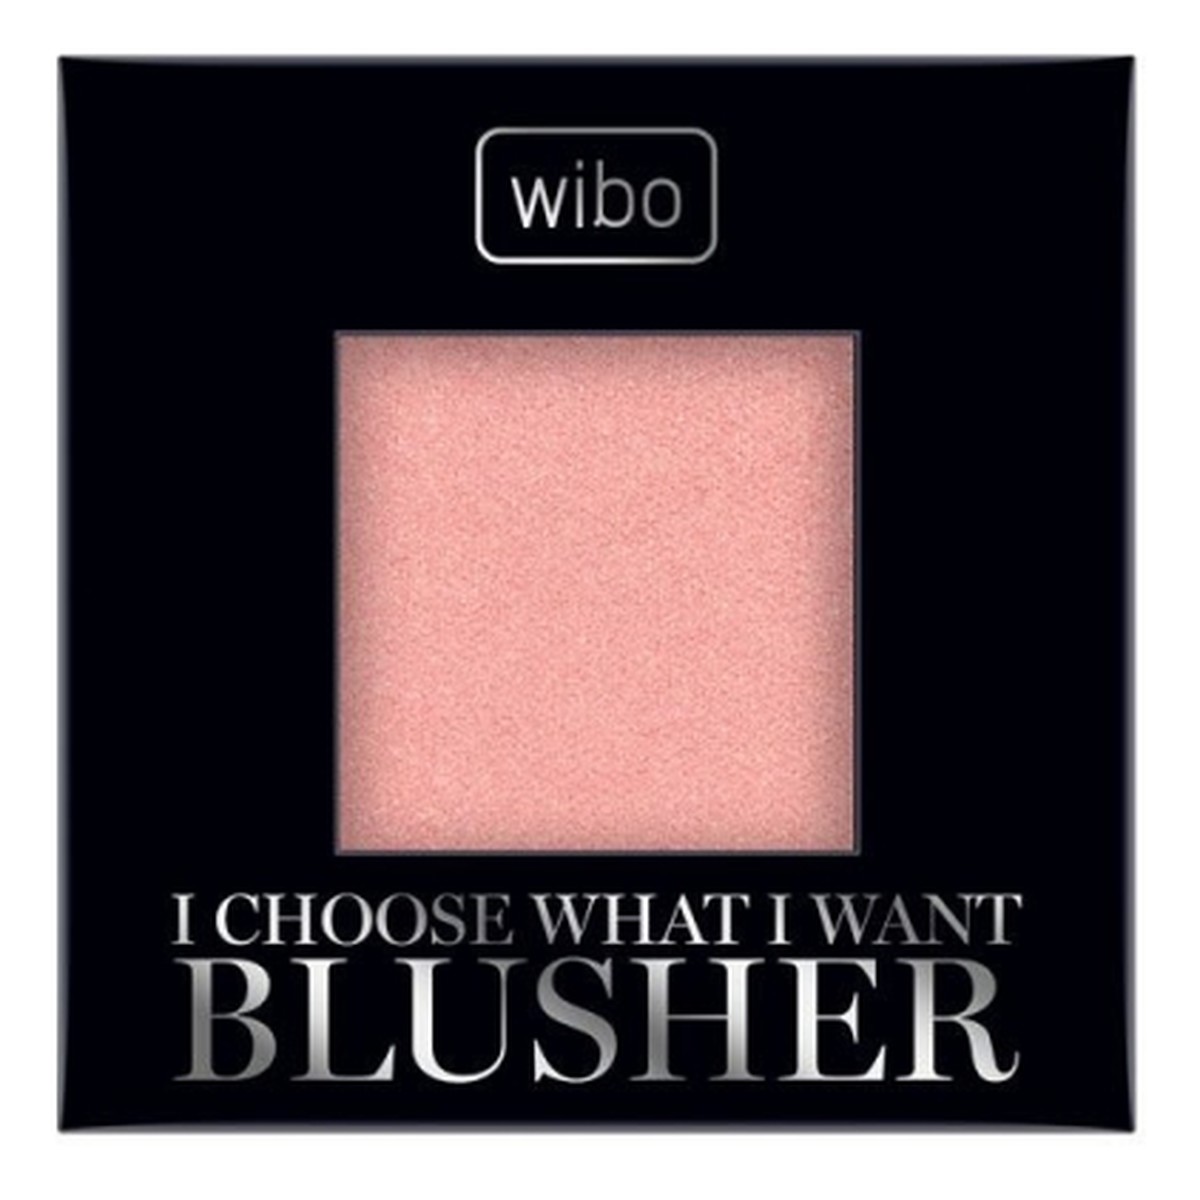 I choose what i want blusher hd rouge pudrowy róż do policzków 4 coral dust